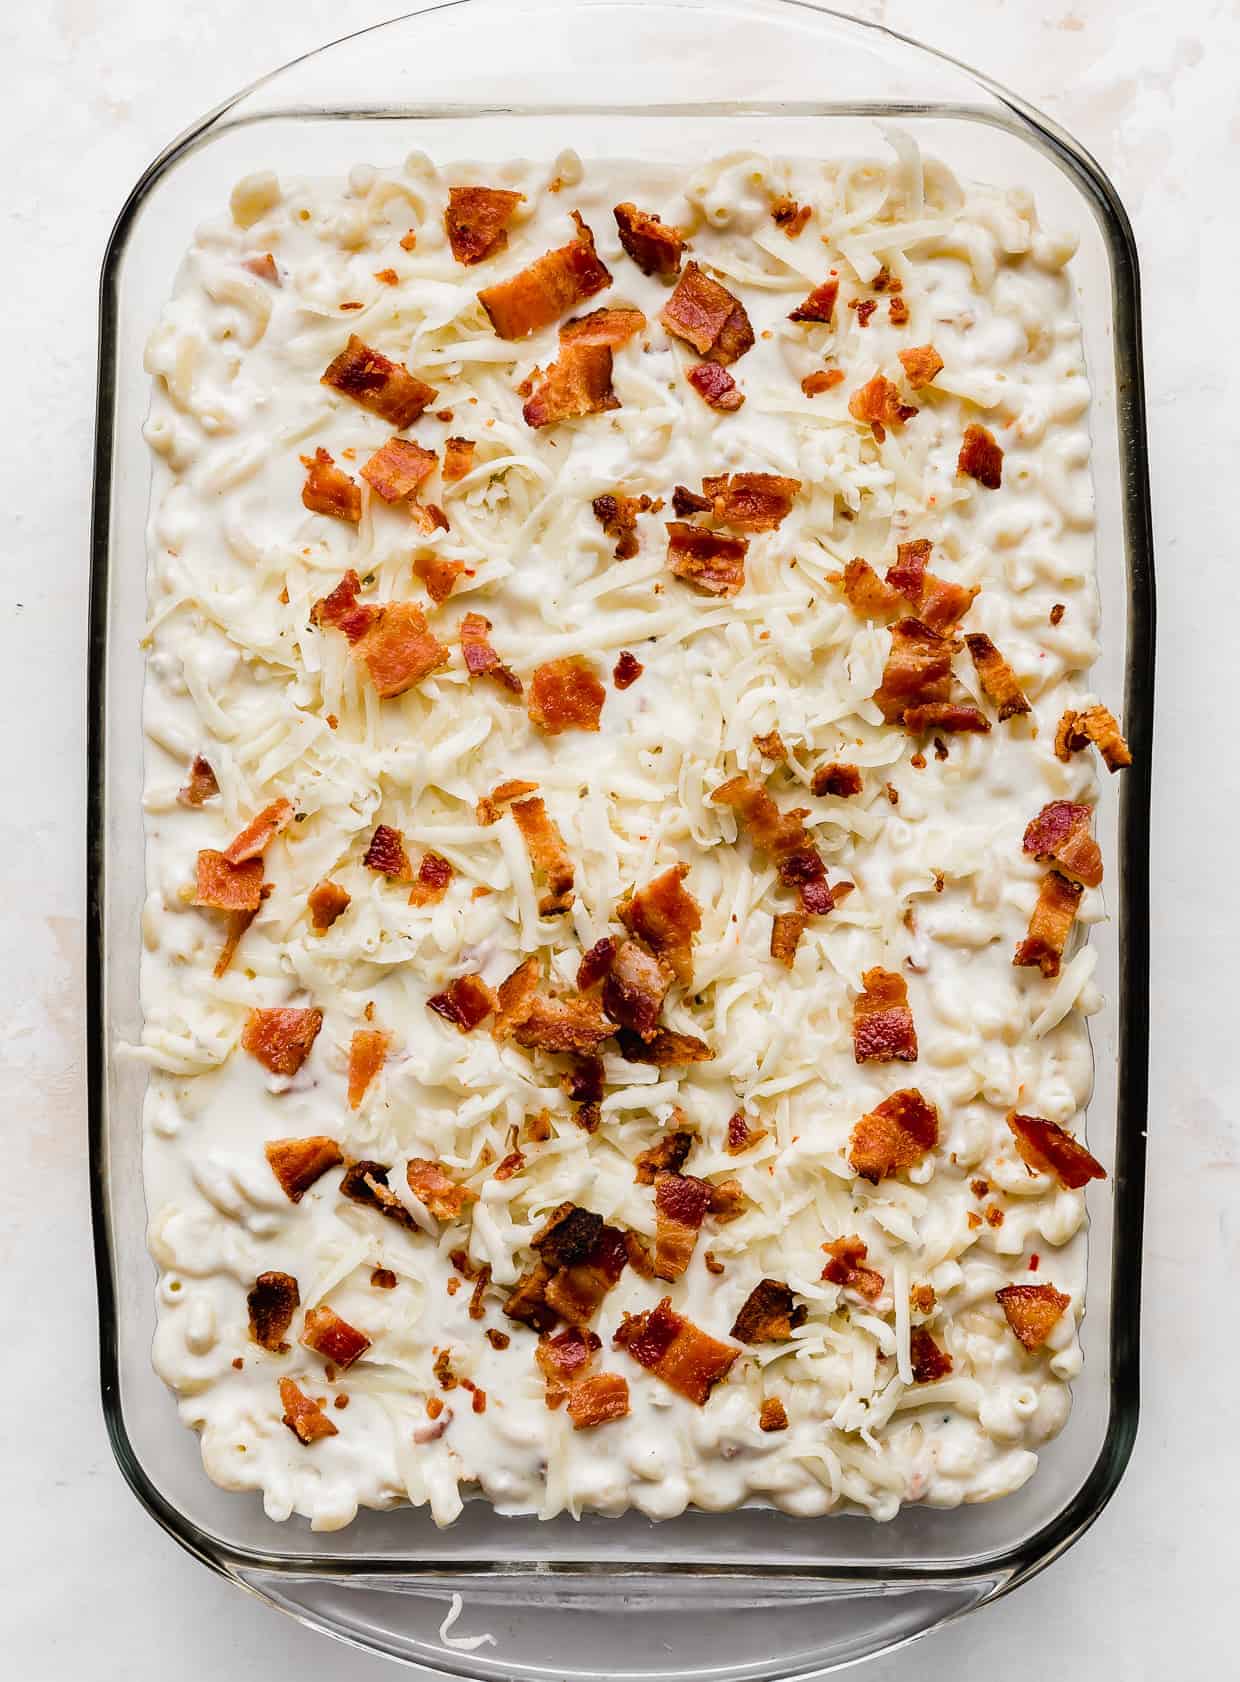 A casserole dish with Bacon Pepper Jack Mac and Cheese in it against a white background.